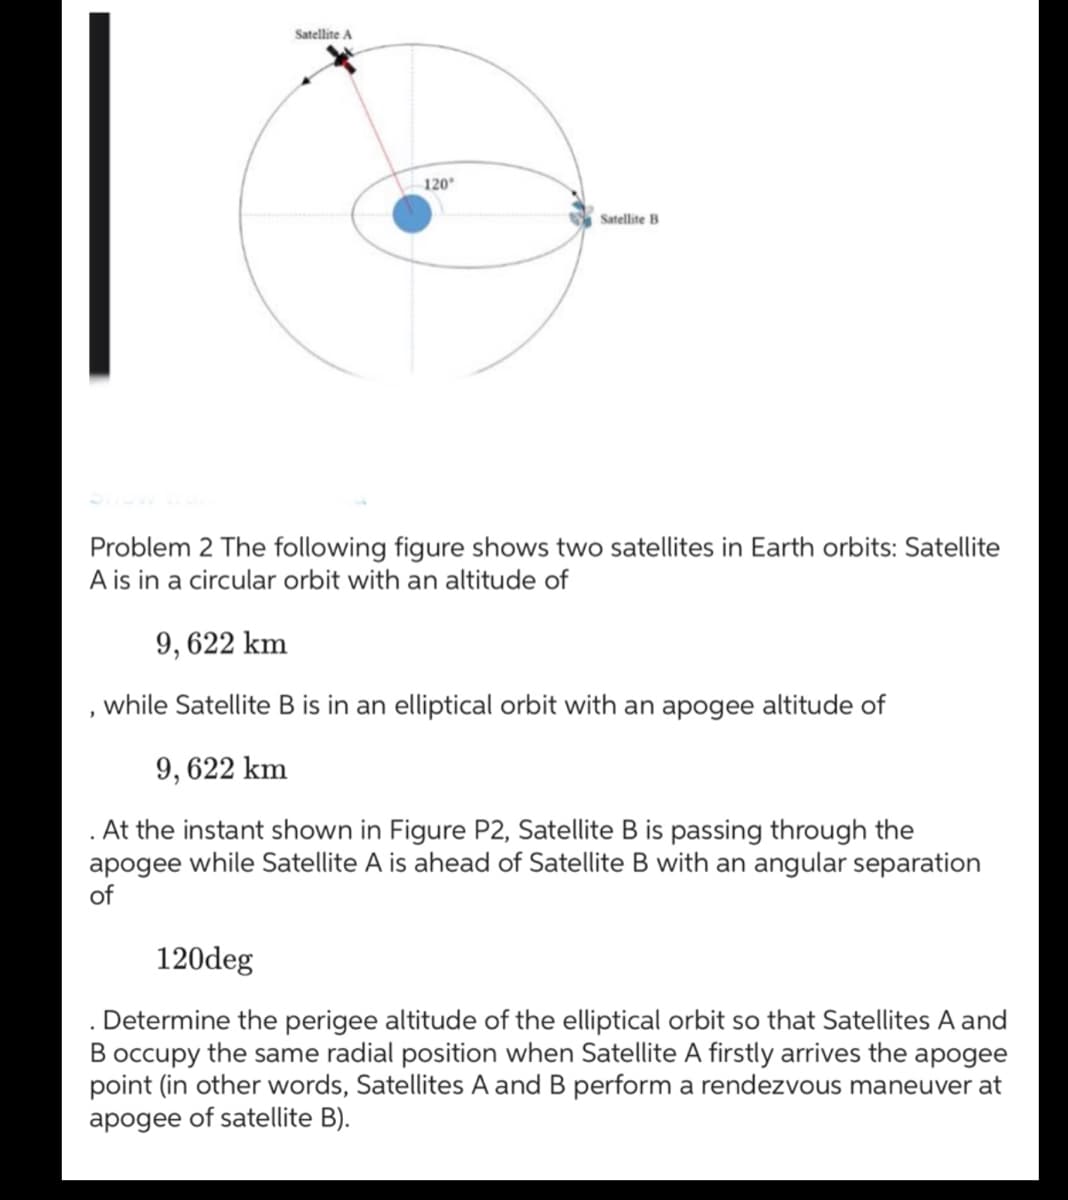 Satellite A
120°
Satellite B
Problem 2 The following figure shows two satellites in Earth orbits: Satellite
A is in a circular orbit with an altitude of
9, 622 km
while Satellite B is in an elliptical orbit with an apogee altitude of
9,622 km
. At the instant shown in Figure P2, Satellite B is passing through the
apogee while Satellite A is ahead of Satellite B with an angular separation
of
120deg
Determine the perigee altitude of the elliptical orbit so that Satellites A and
B occupy the same radial position when Satellite A firstly arrives the apogee
point (in other words, Satellites A and B perform a rendezvous maneuver at
apogee of satellite B).